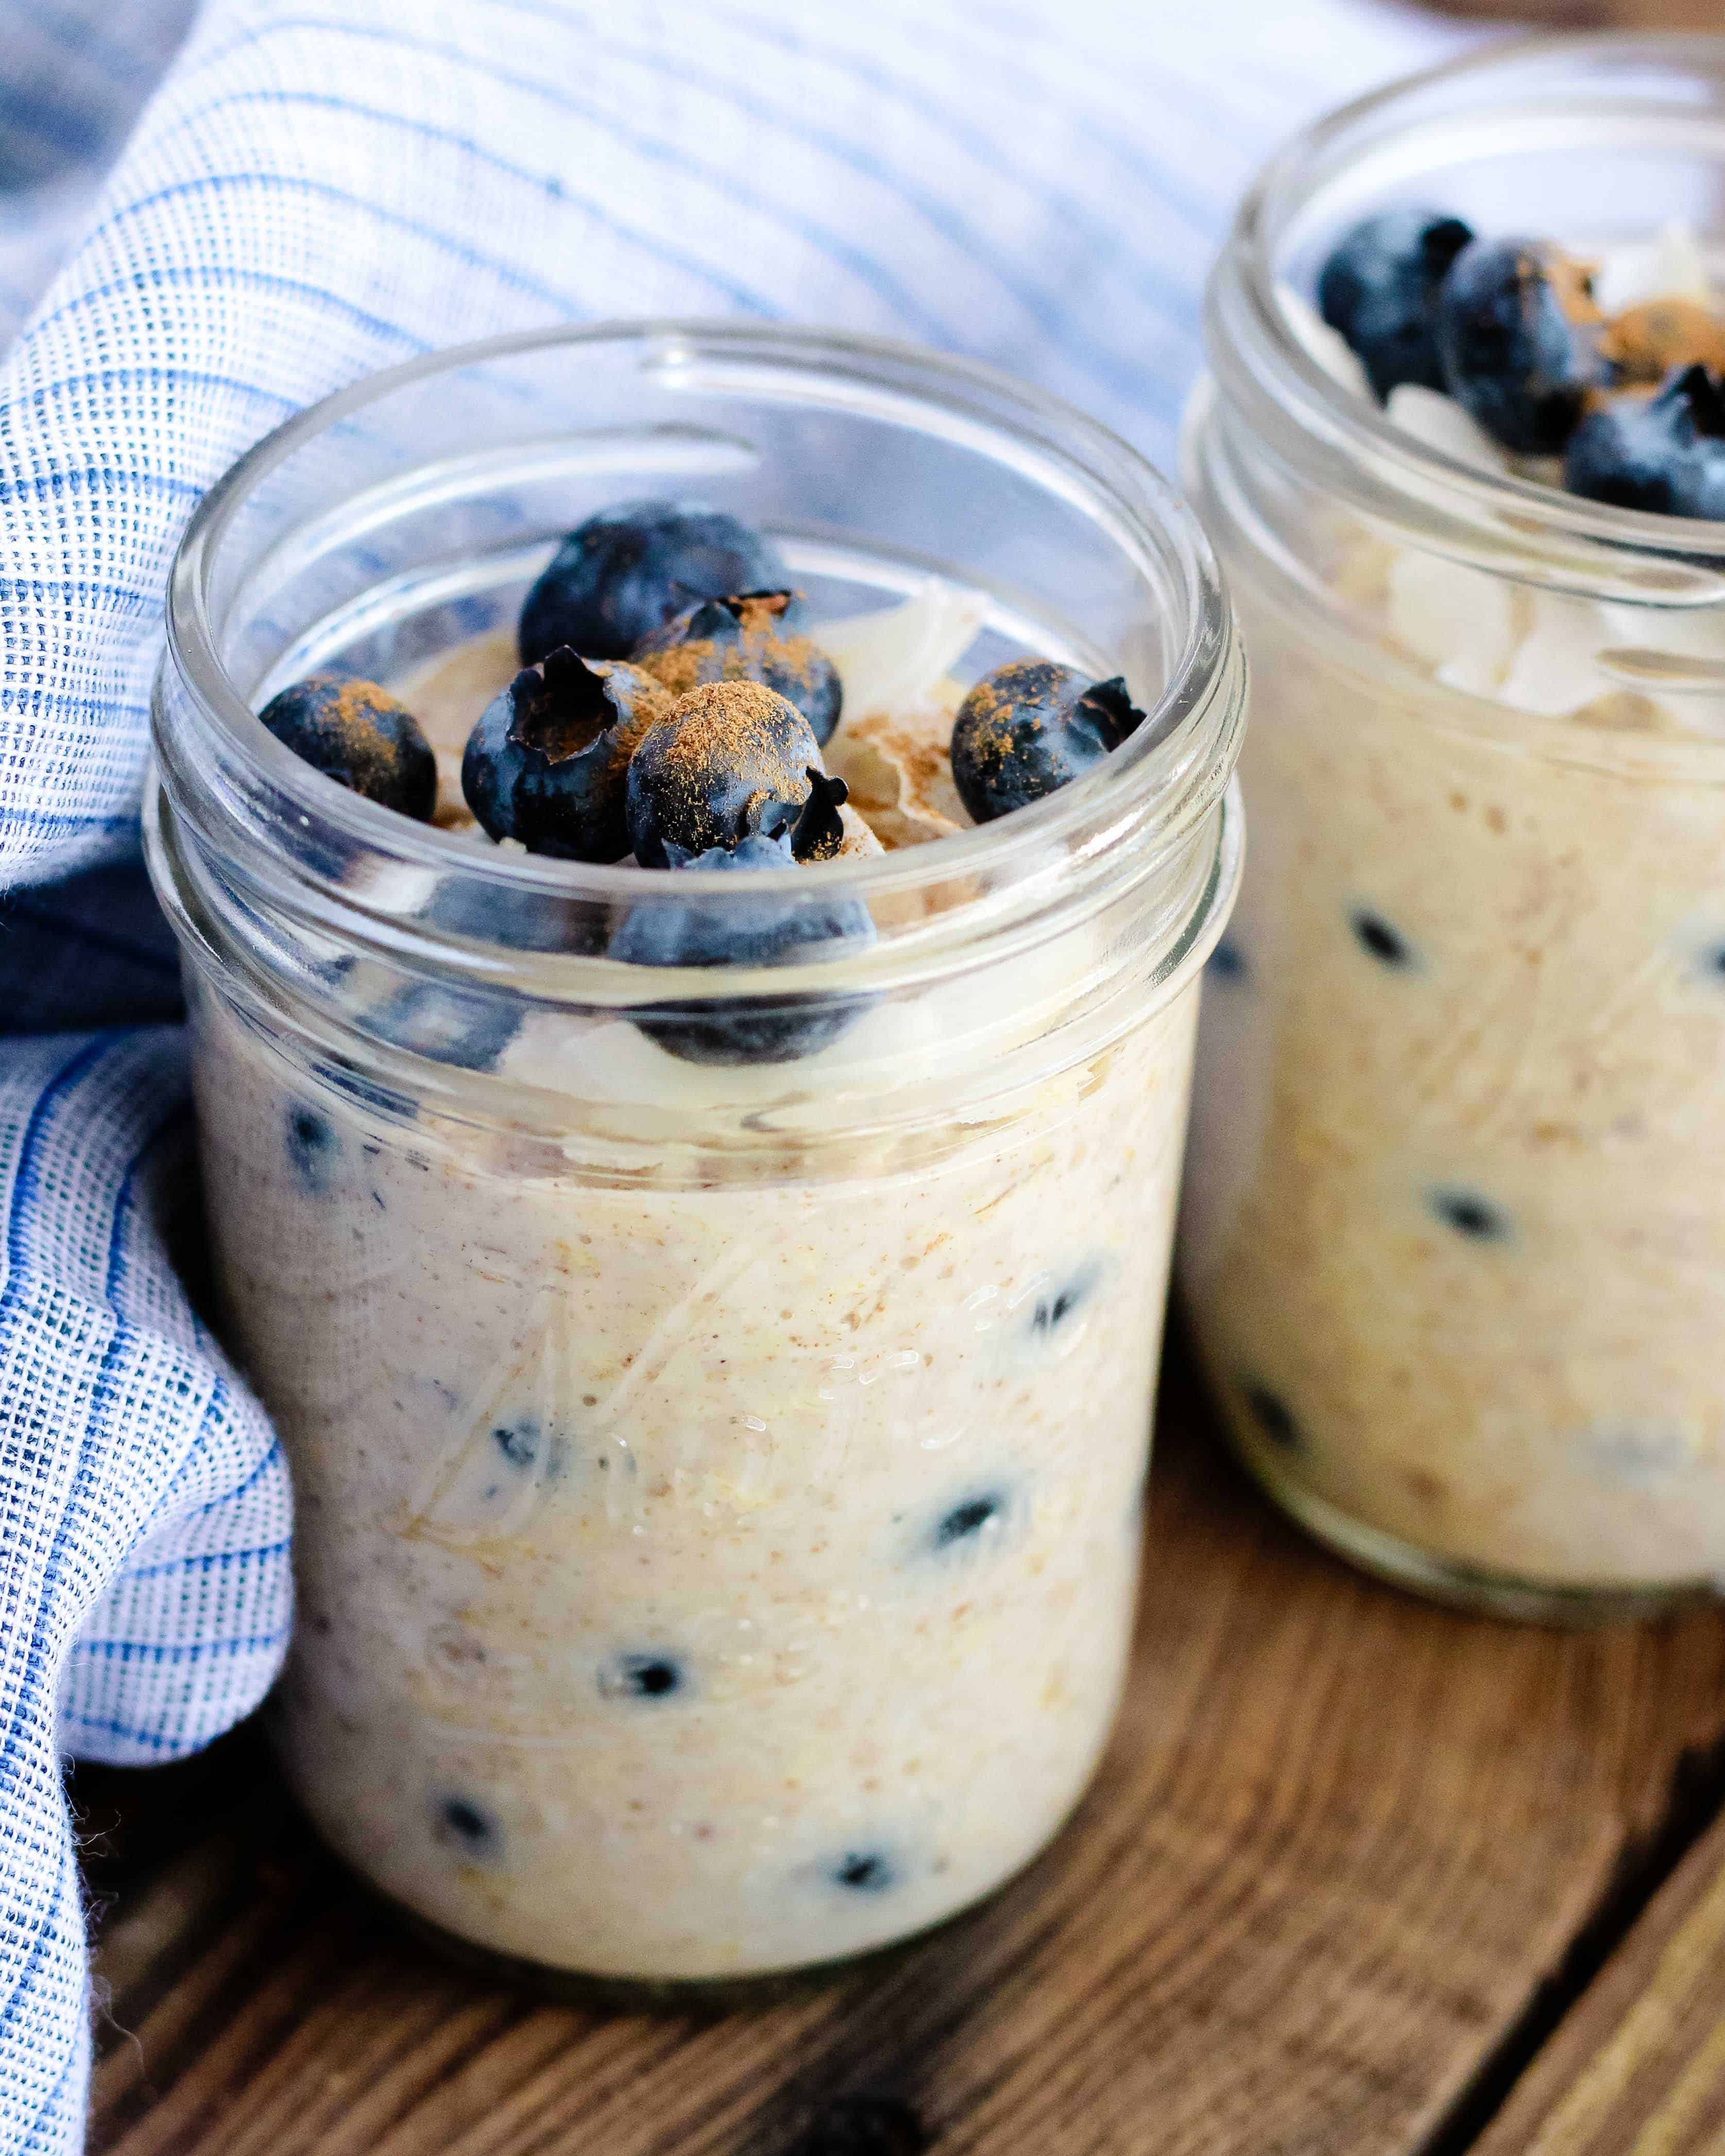 Blueberry Coconut Overnight Oats with kefir are an easy meal prep option for quick breakfasts using oats. Just chill overnight for a quick breakfast